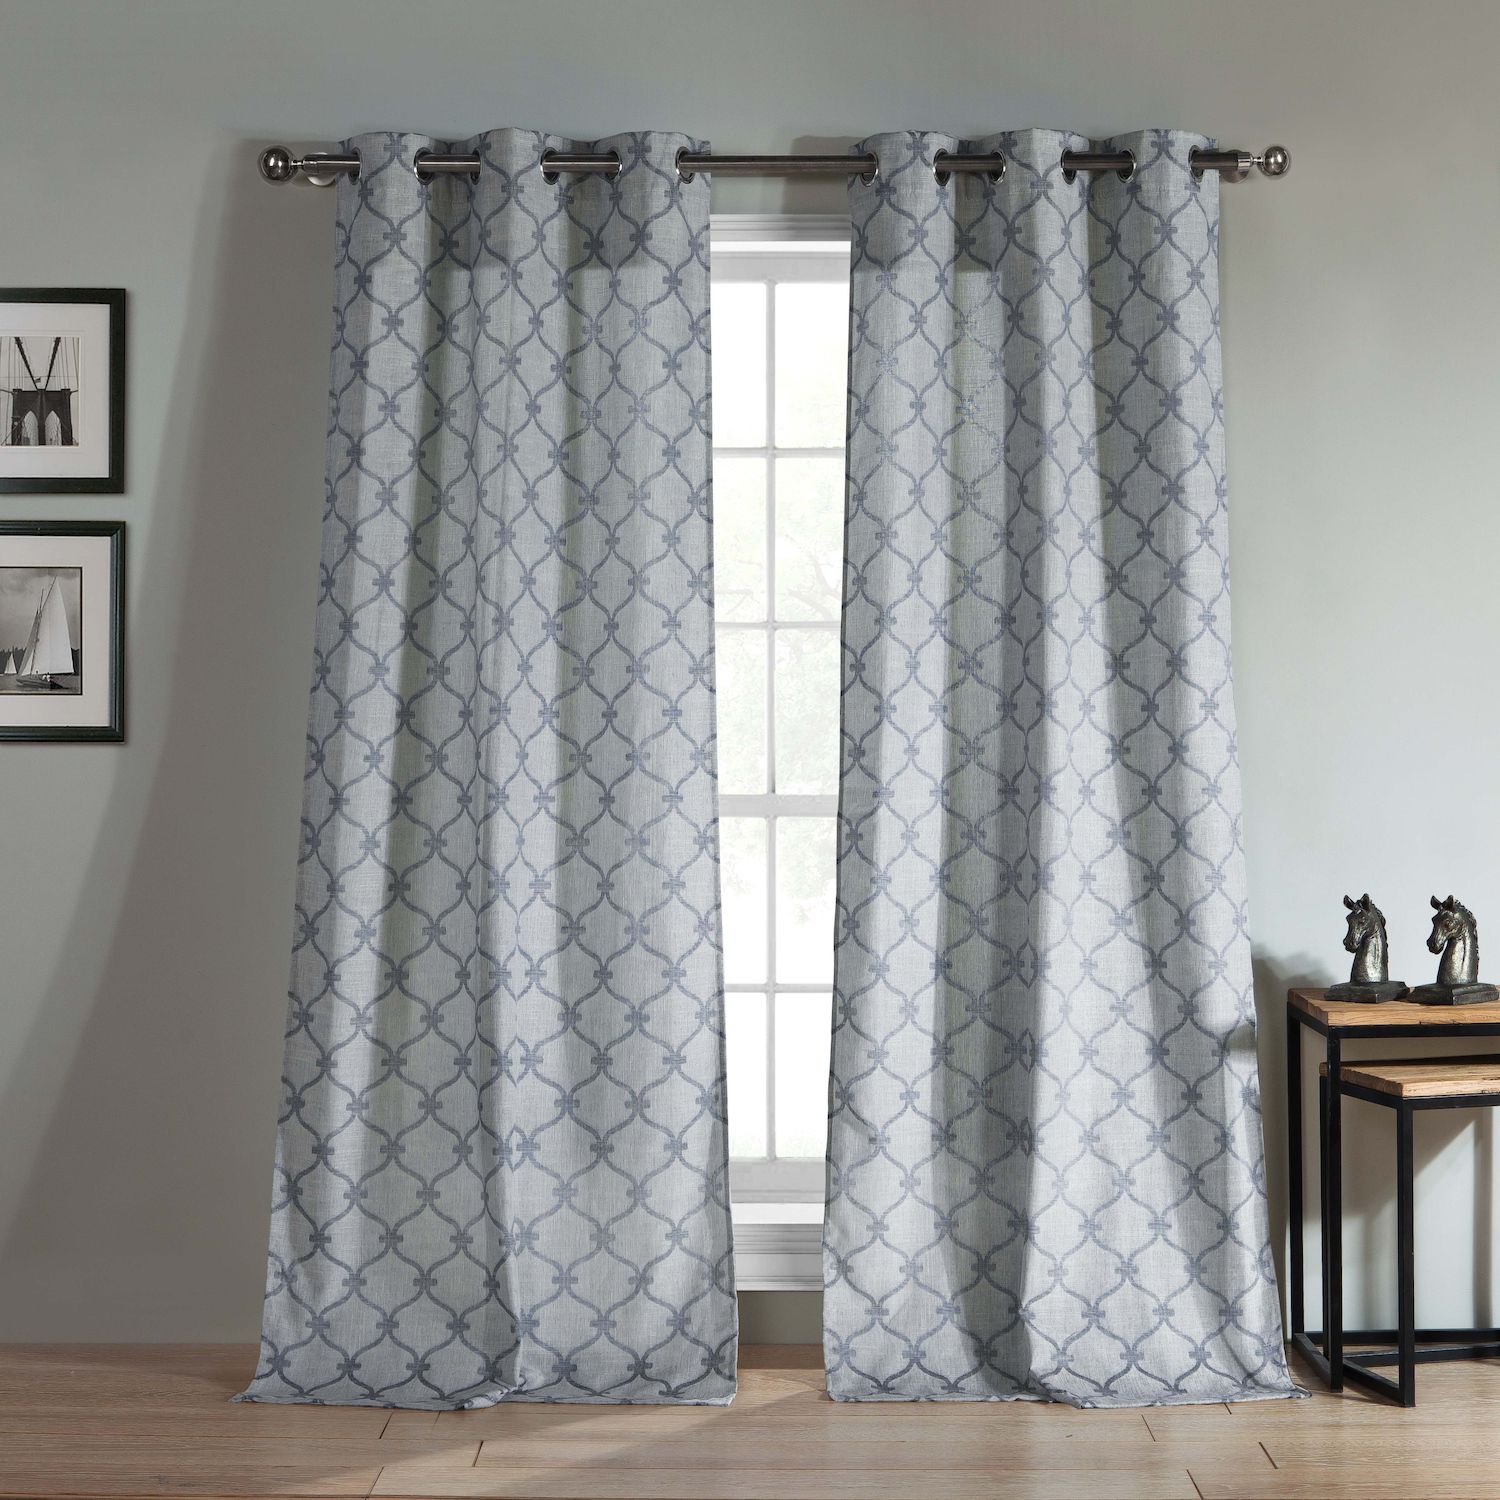 Image for Duck River Textile Kenilworth Geometric 2-pack Window Curtain Set at Kohl's.